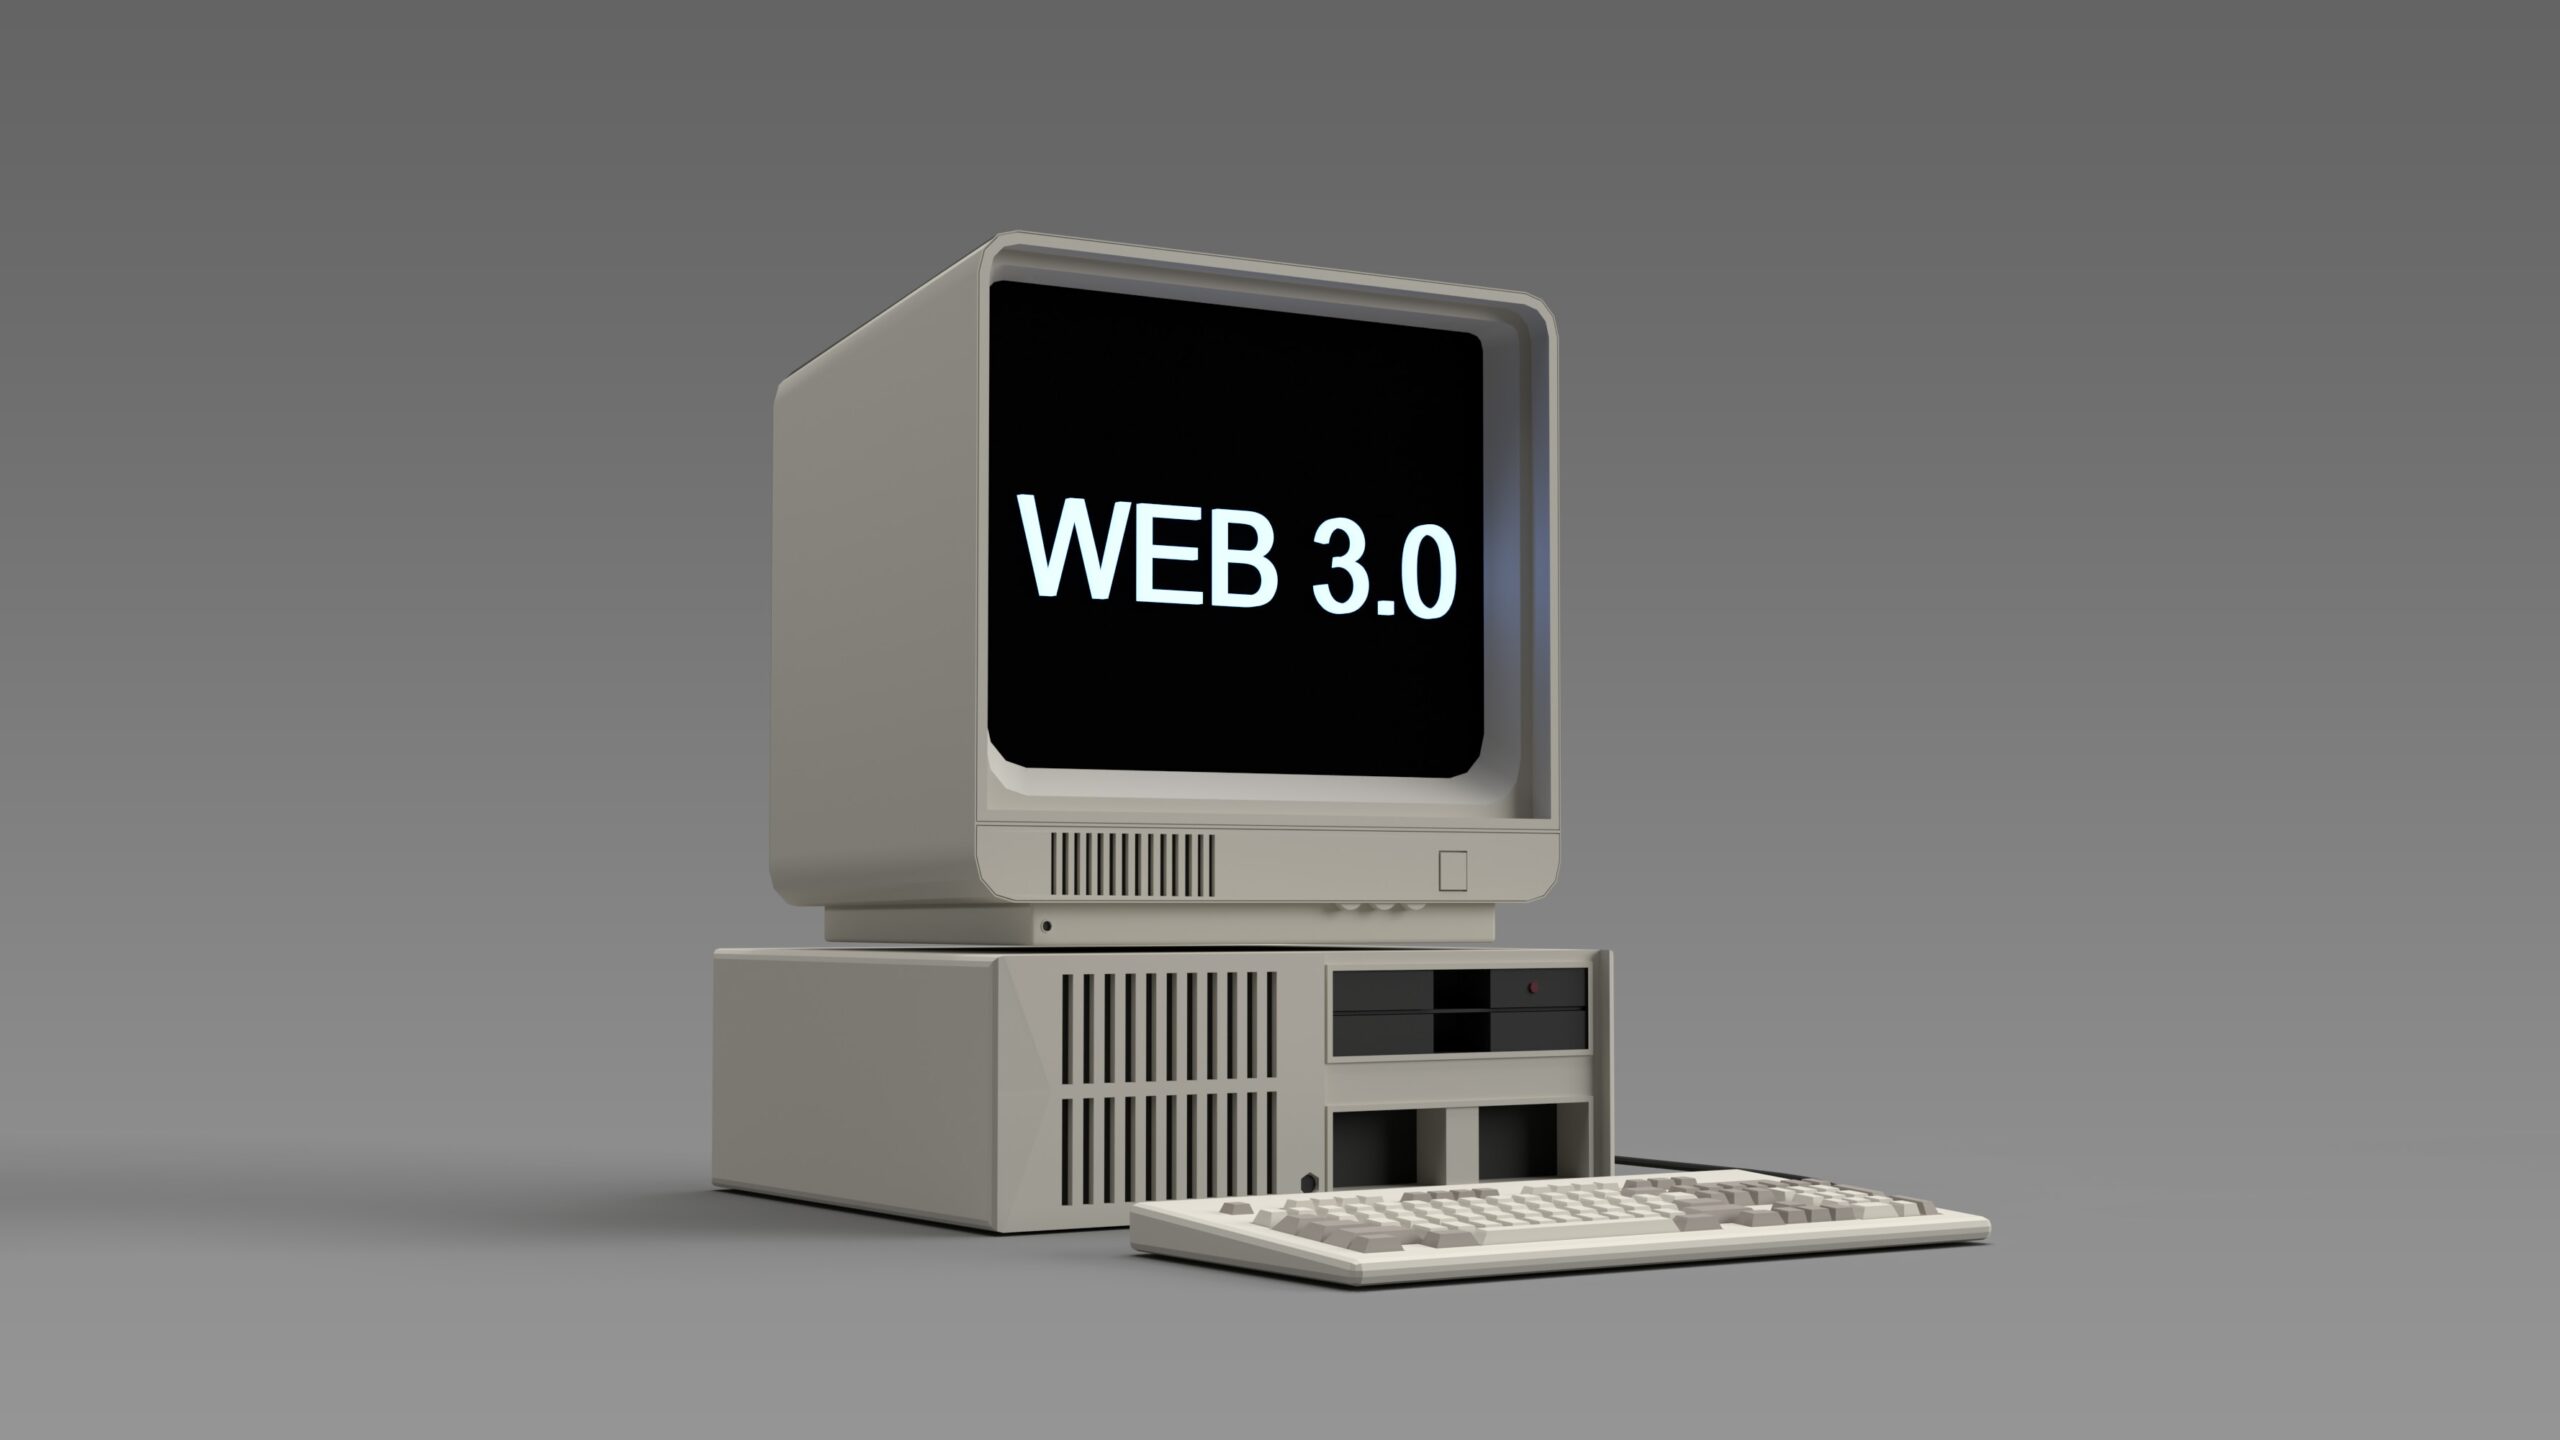 old computer with web 3.0 written on the screen